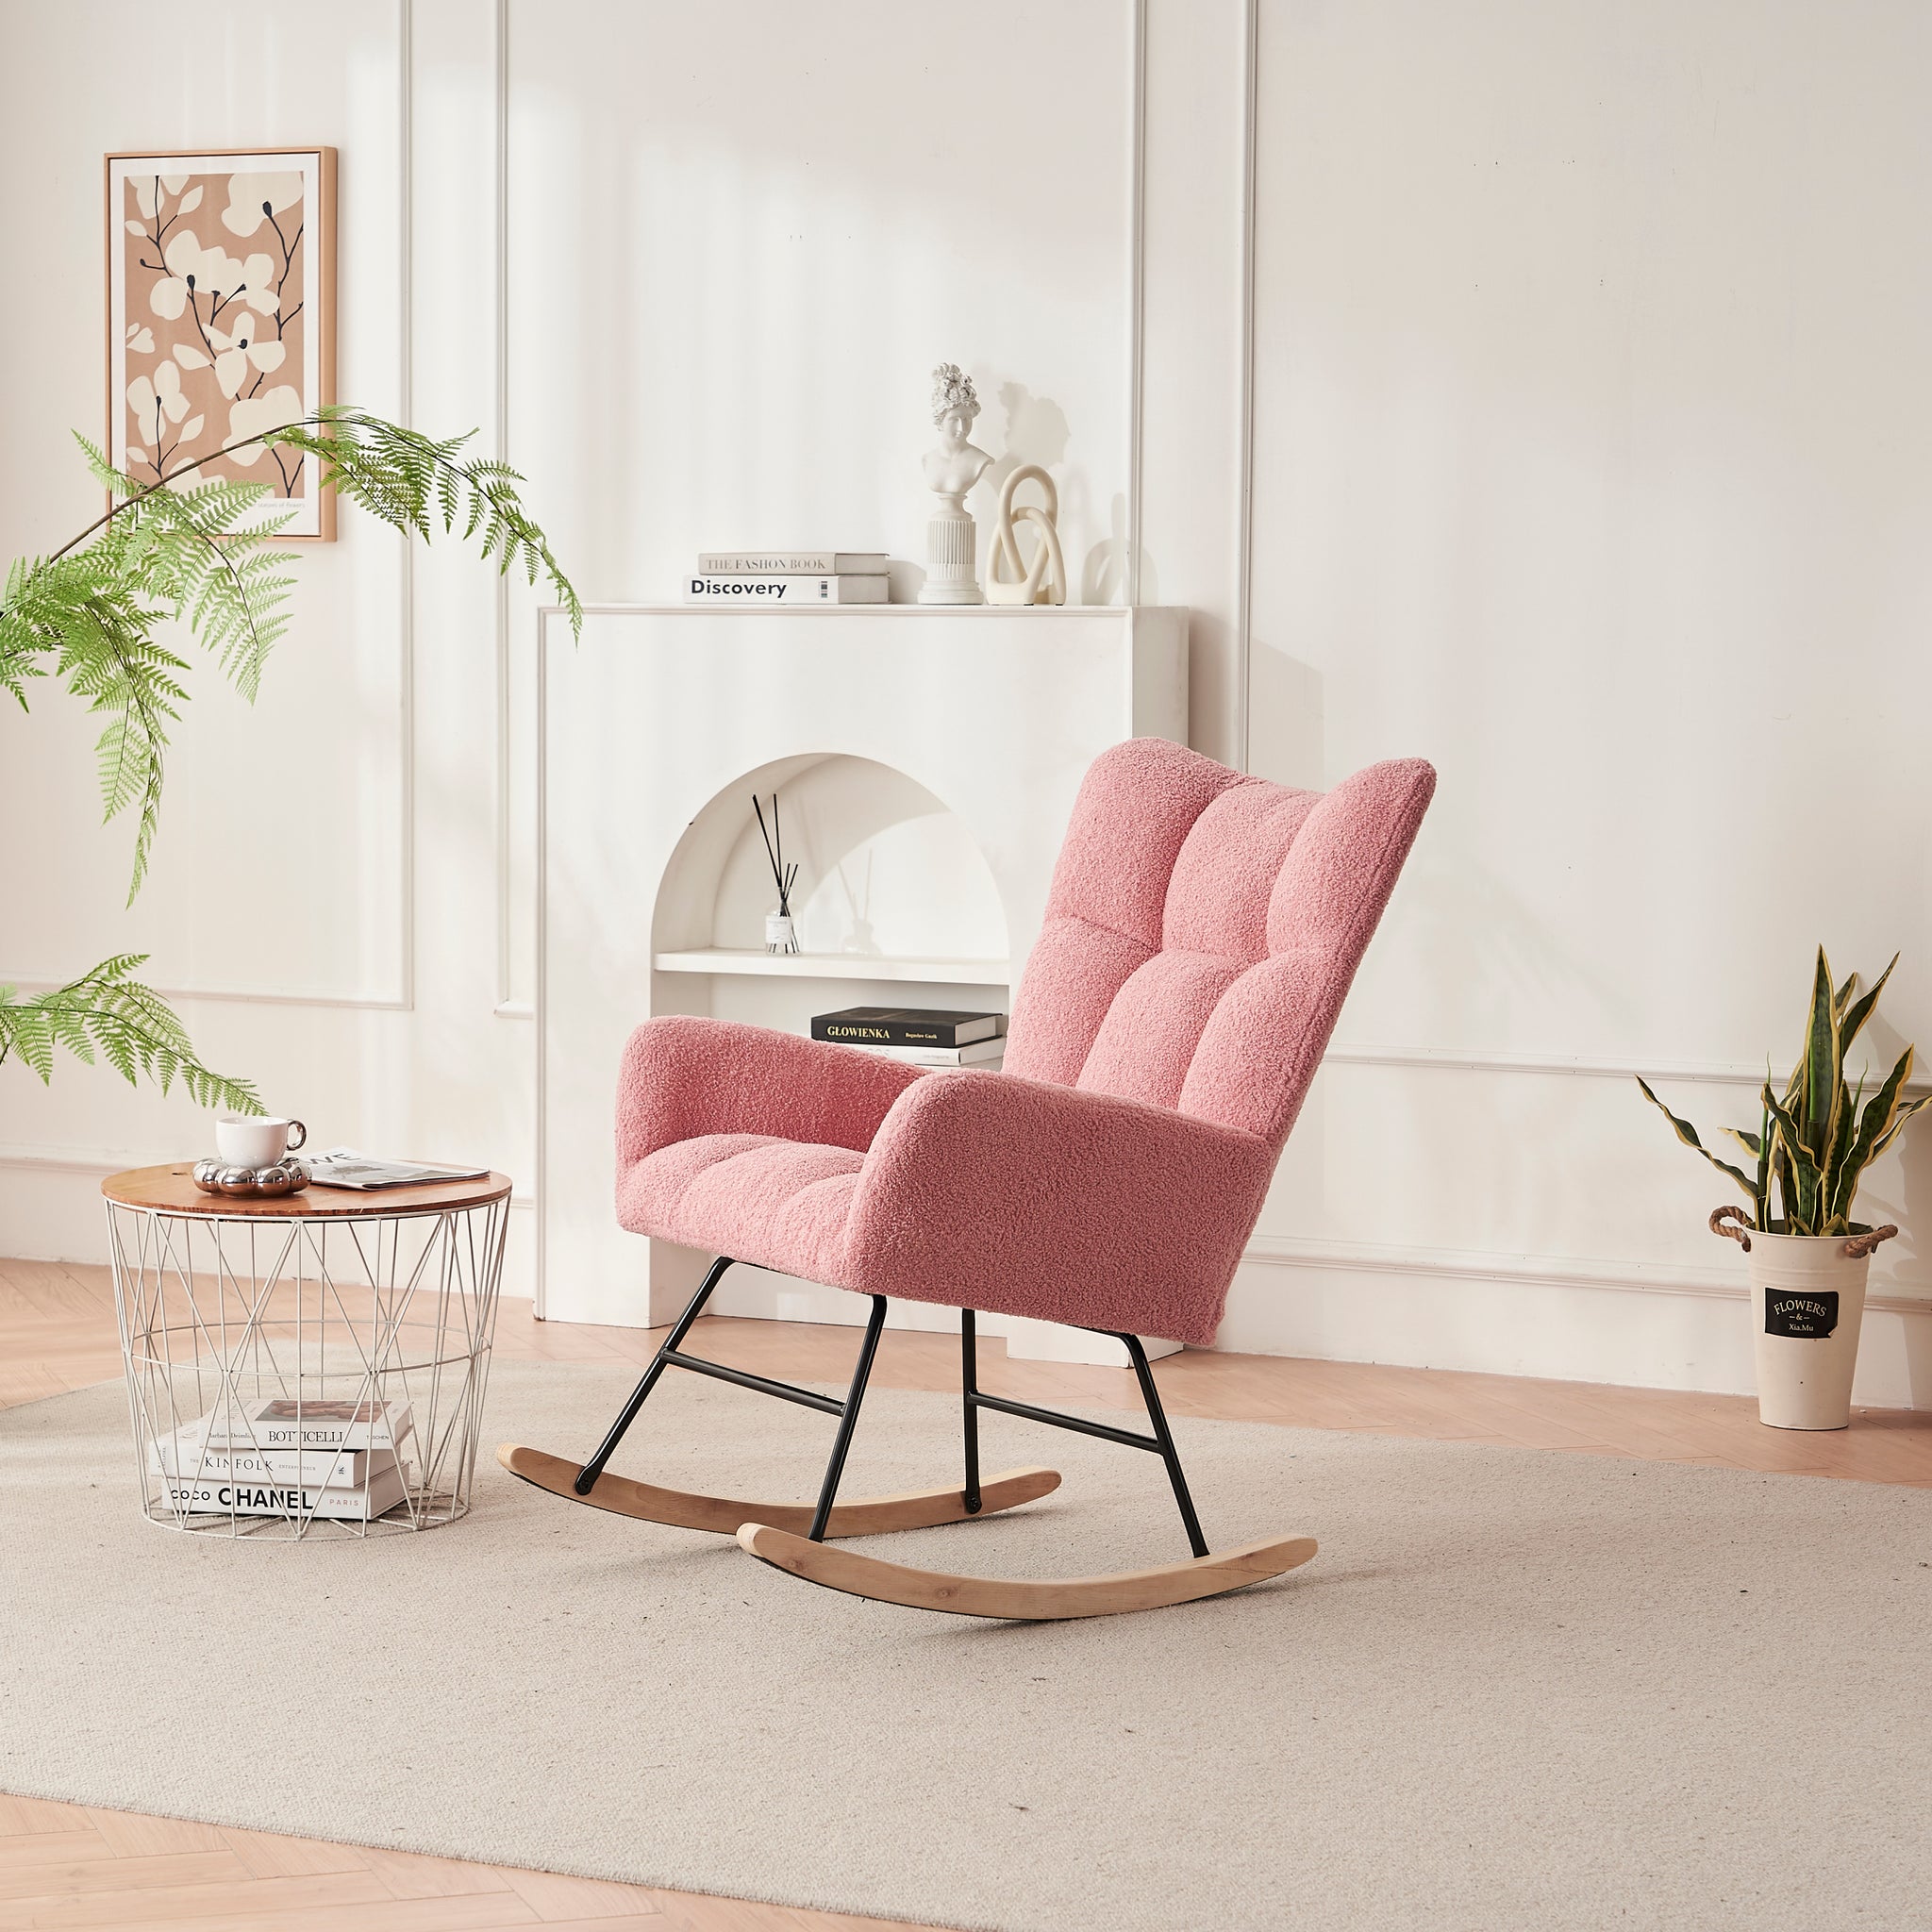 Rocking Chair Nursery, Solid Wood Legs Reading Chair pink-primary living space-modern-rocking